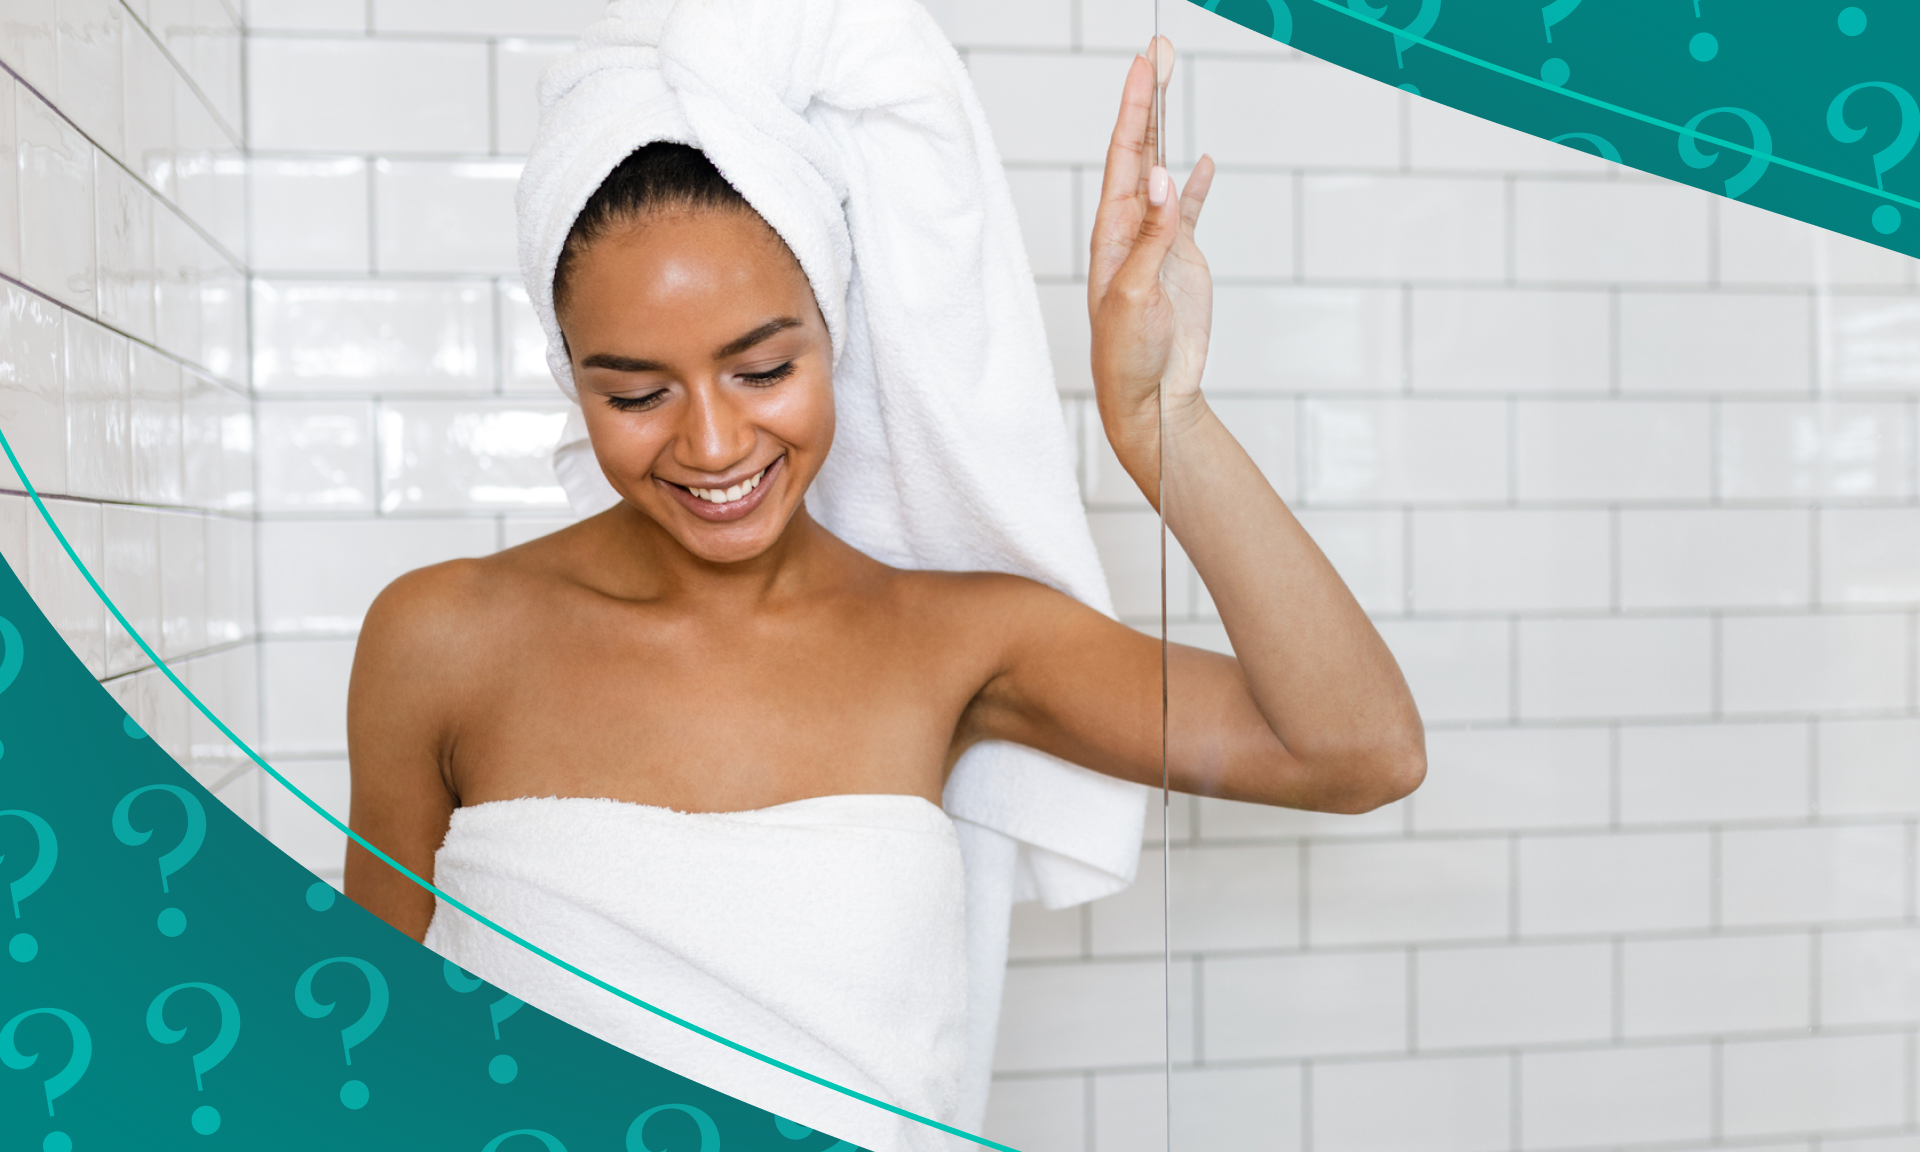 Shower Routine Steps: How to Shower the Right Way